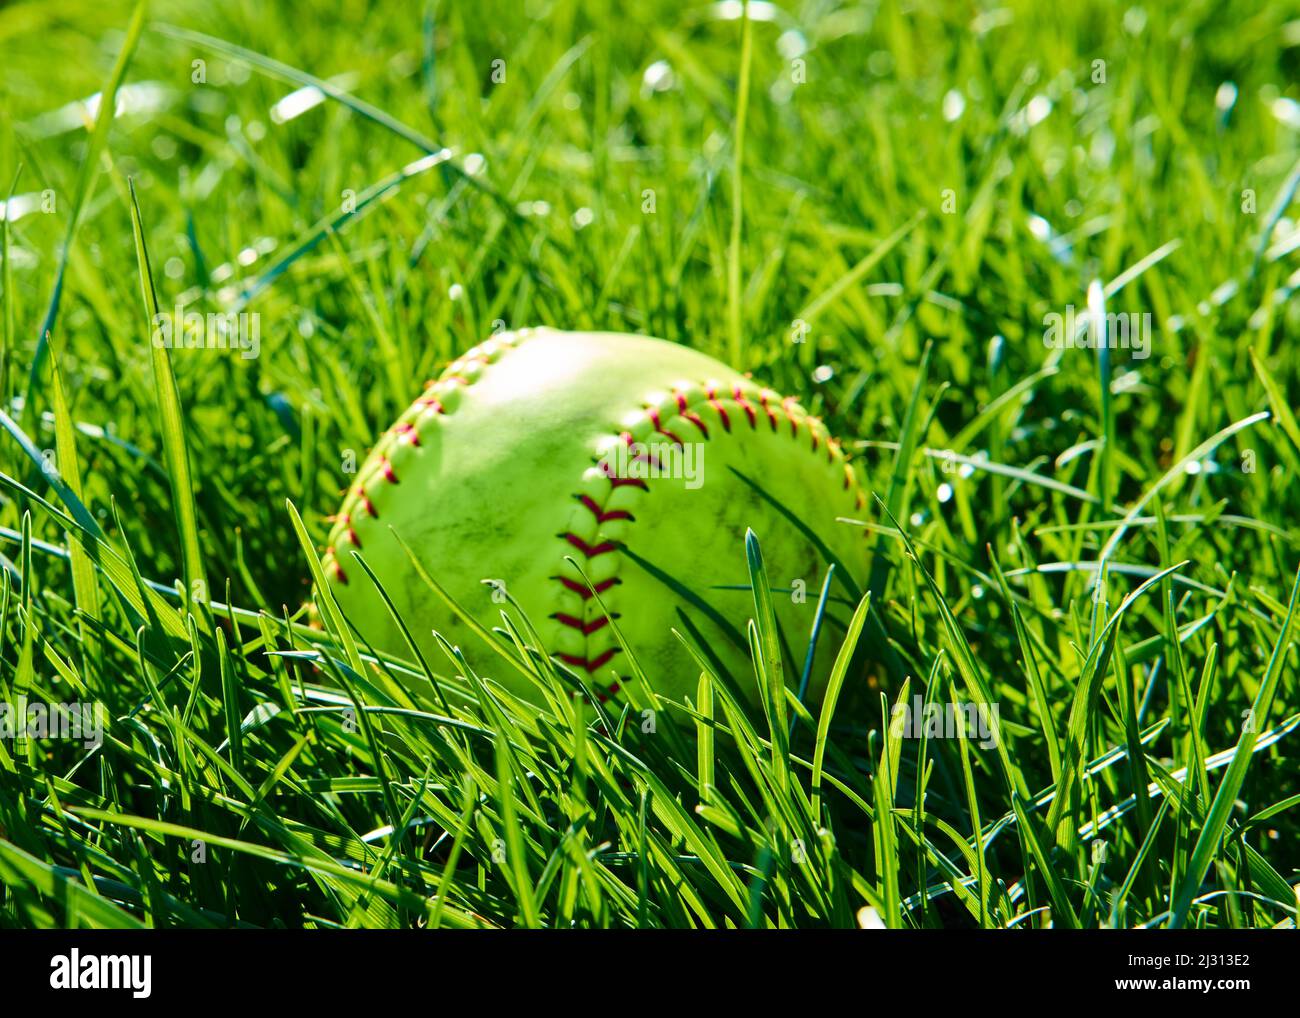 Yellow softball laying in lush green grass on a summer day. Stock Photo